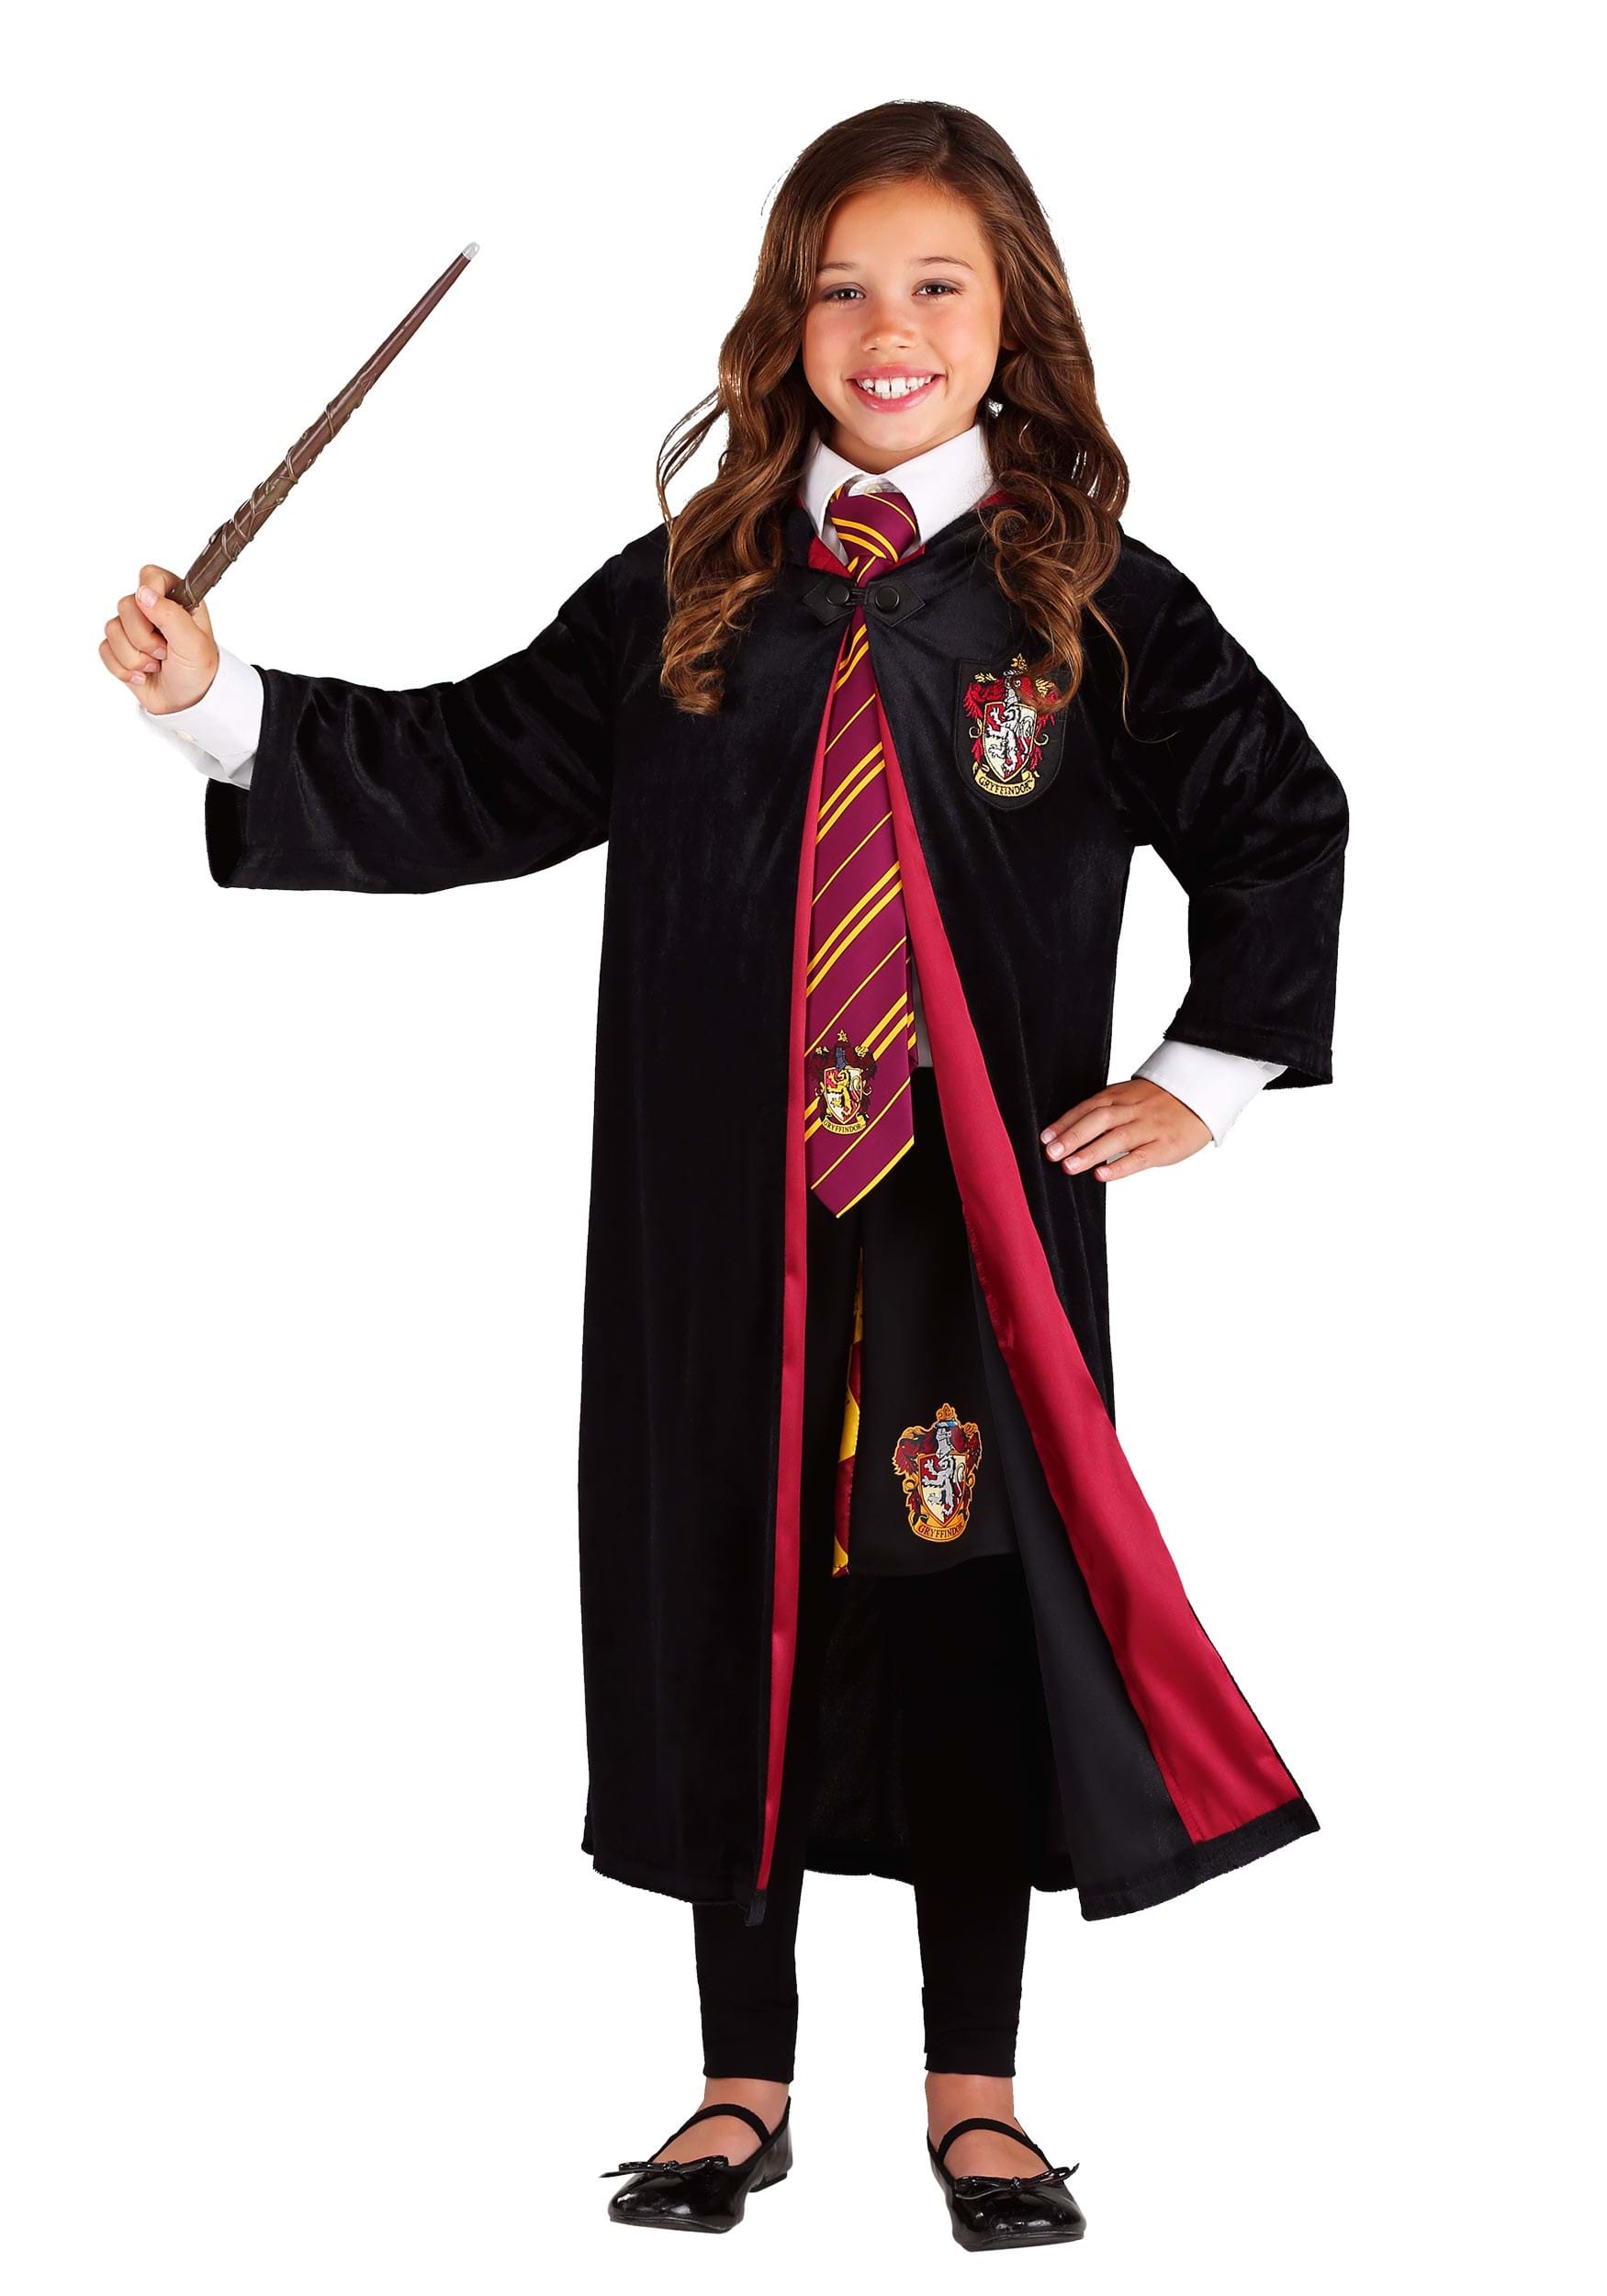 Photos - Fancy Dress Potter Jerry Leigh Harry  Deluxe Hermione Gryffindor Robe for Kids Black 